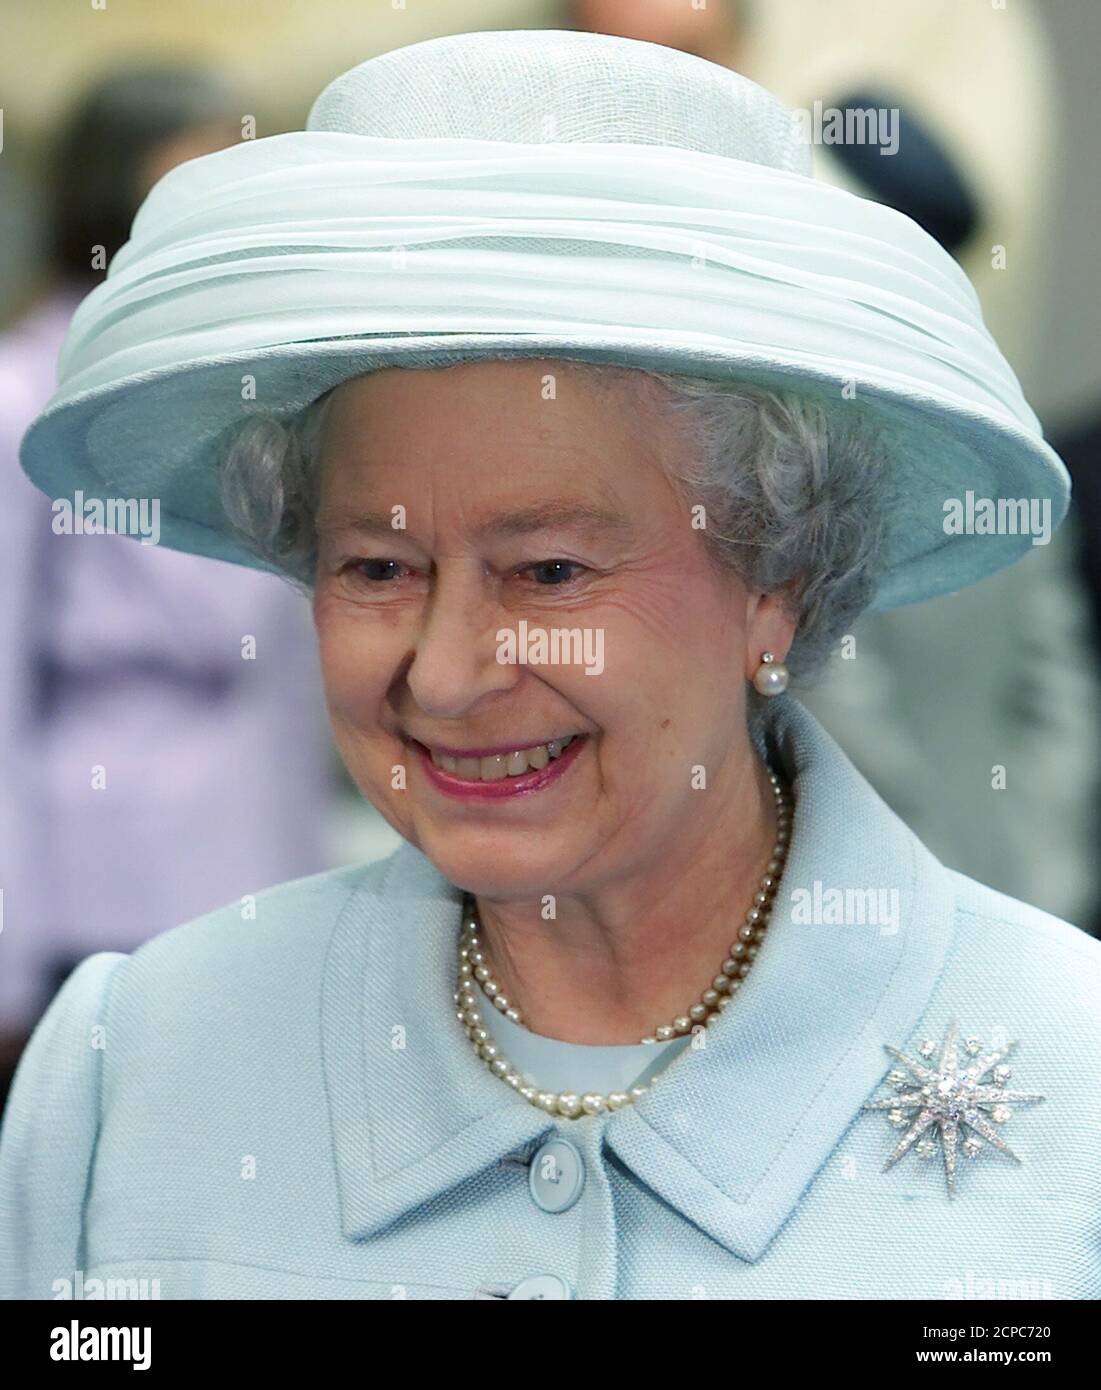 British Queen Elizabeth smiles during the opening ceremony of the new British embassy in Berlin July 18. The new embassy designed by British architect Michael Wilford is based on the same site as the old building which was destroyed by Allied bombers in World War Two.  MUR Stock Photo